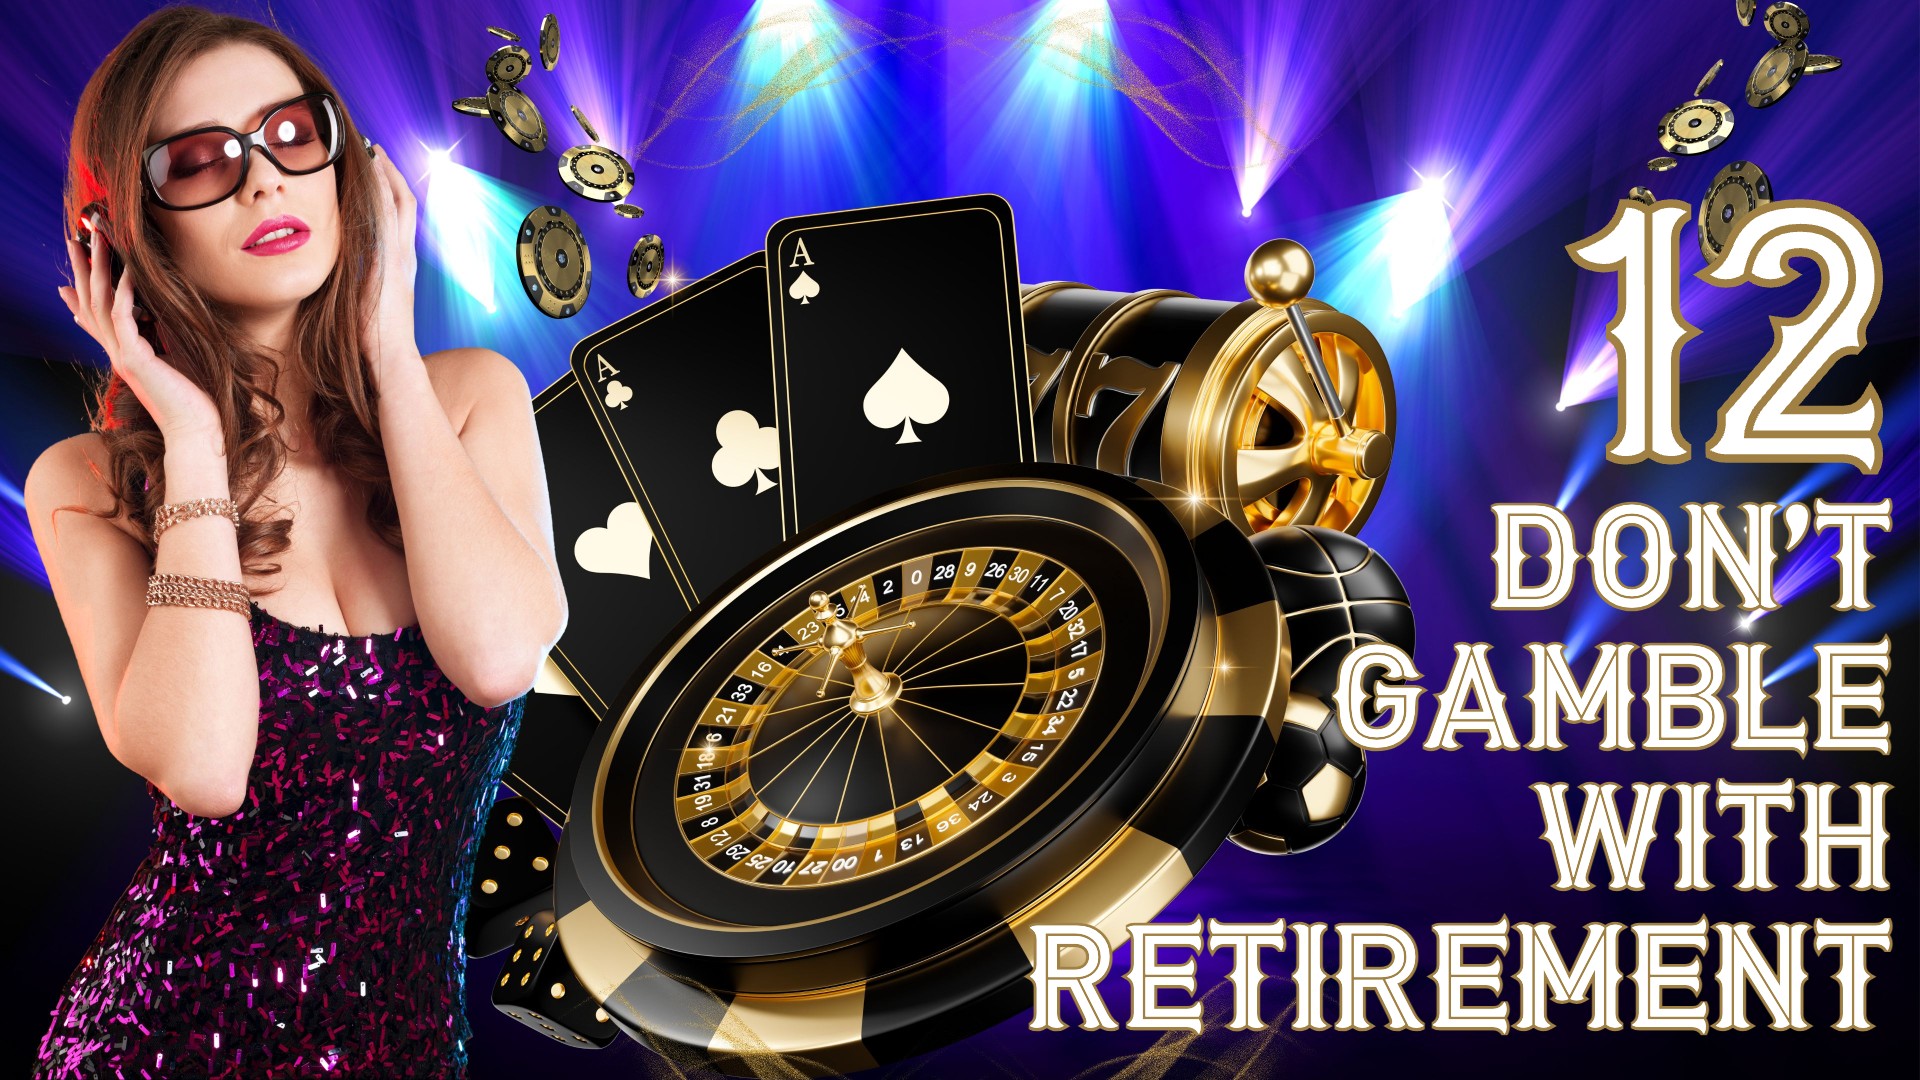 Don't Gamble with Retirement 12